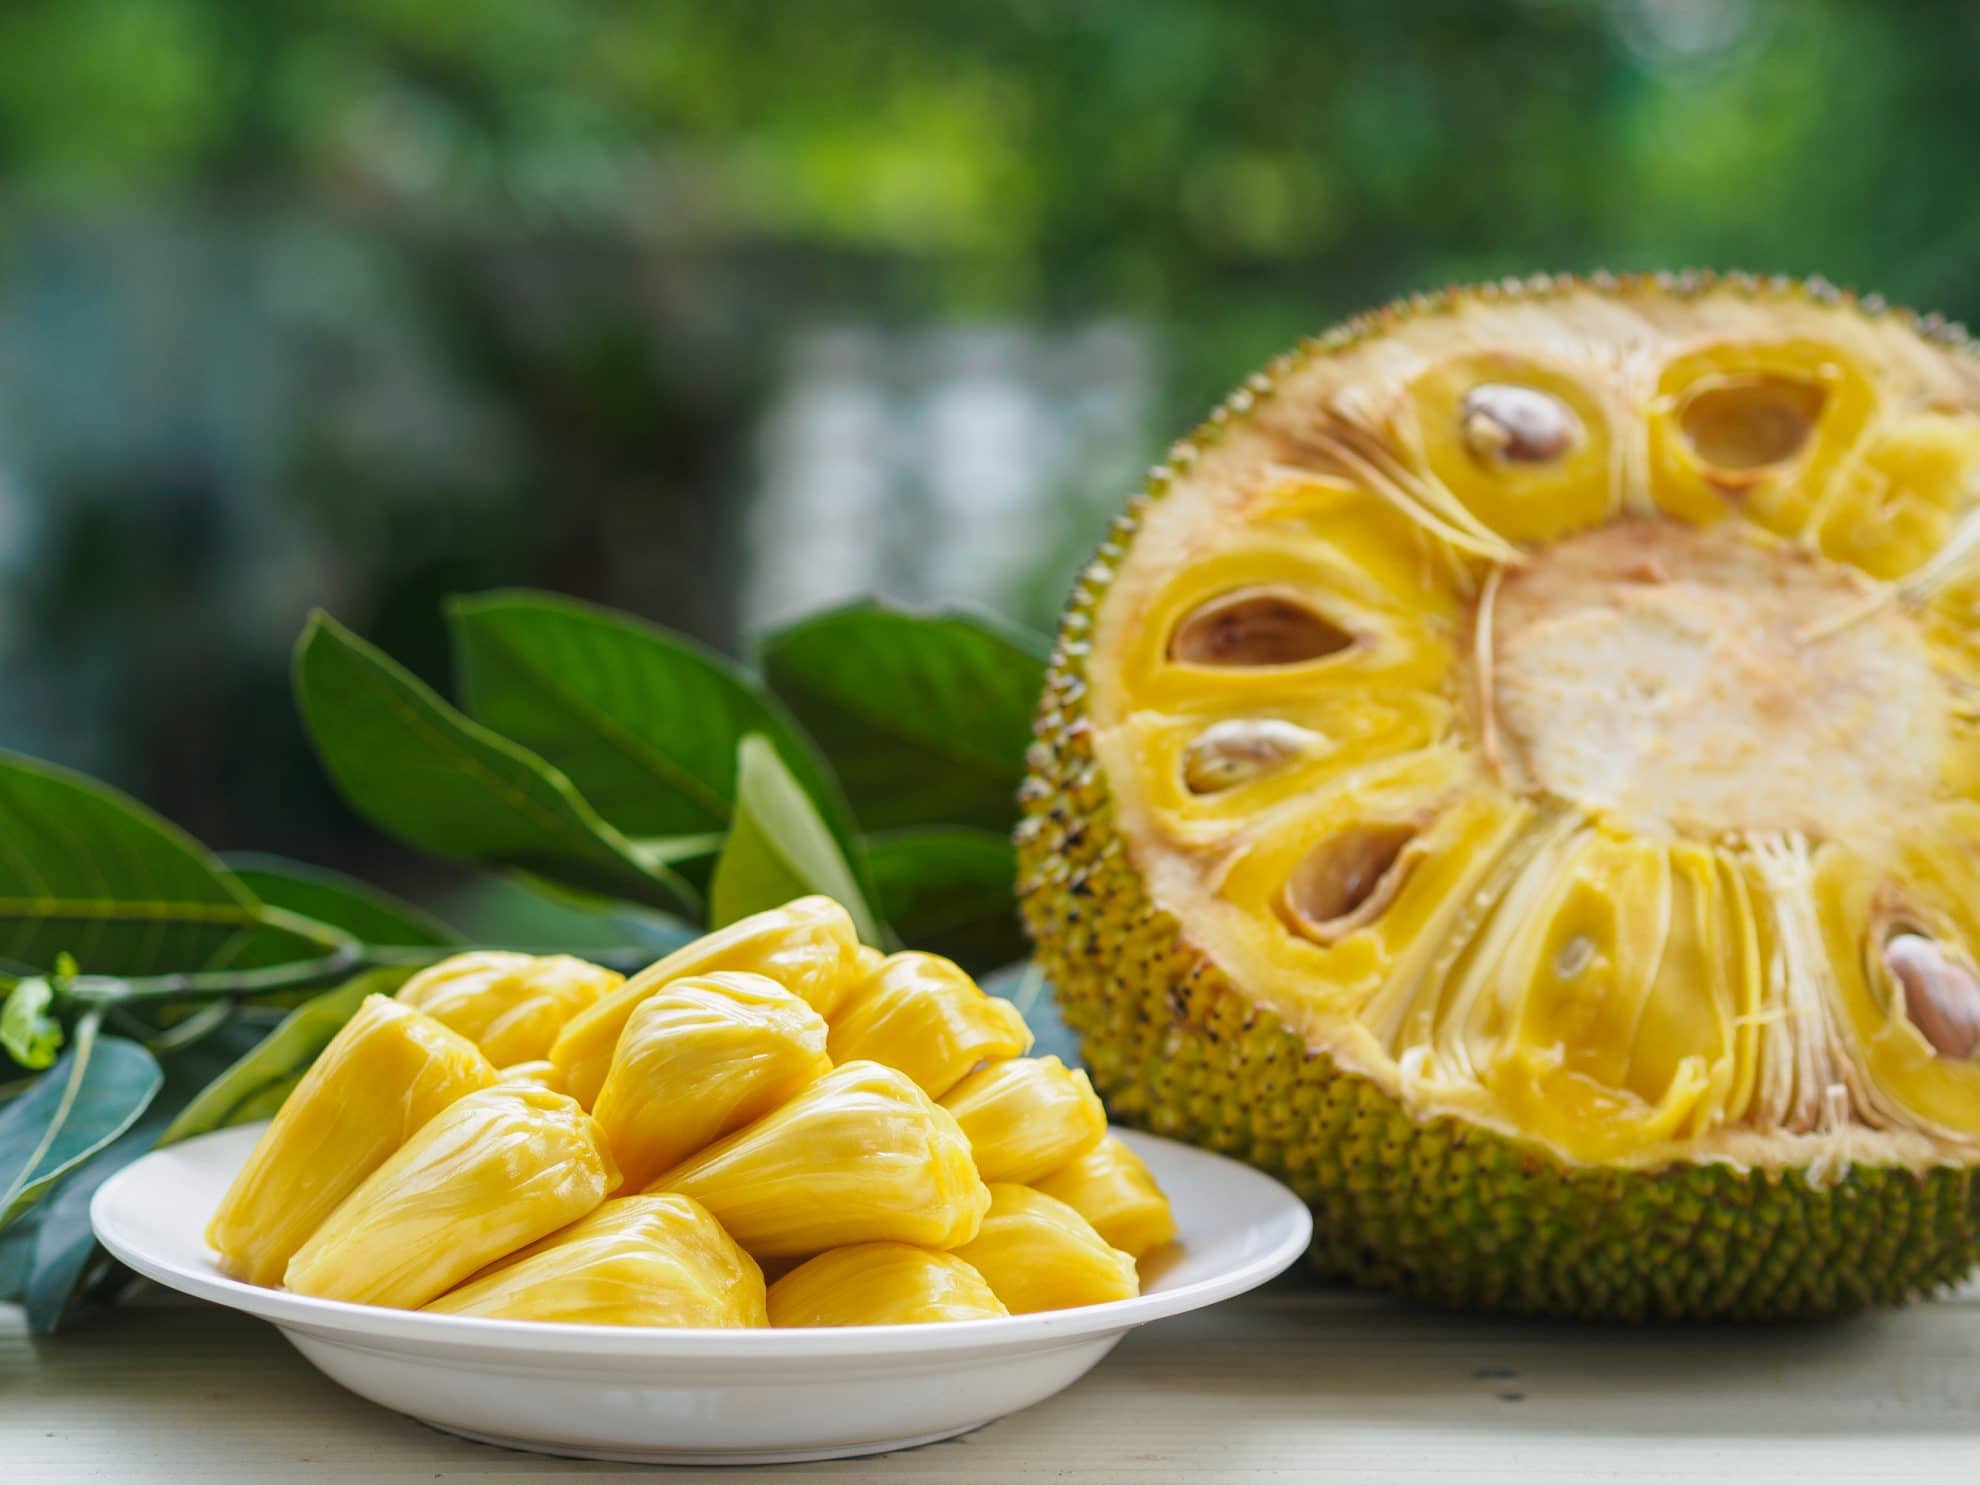 Jackfruit – Health Benefits, Uses, and Important